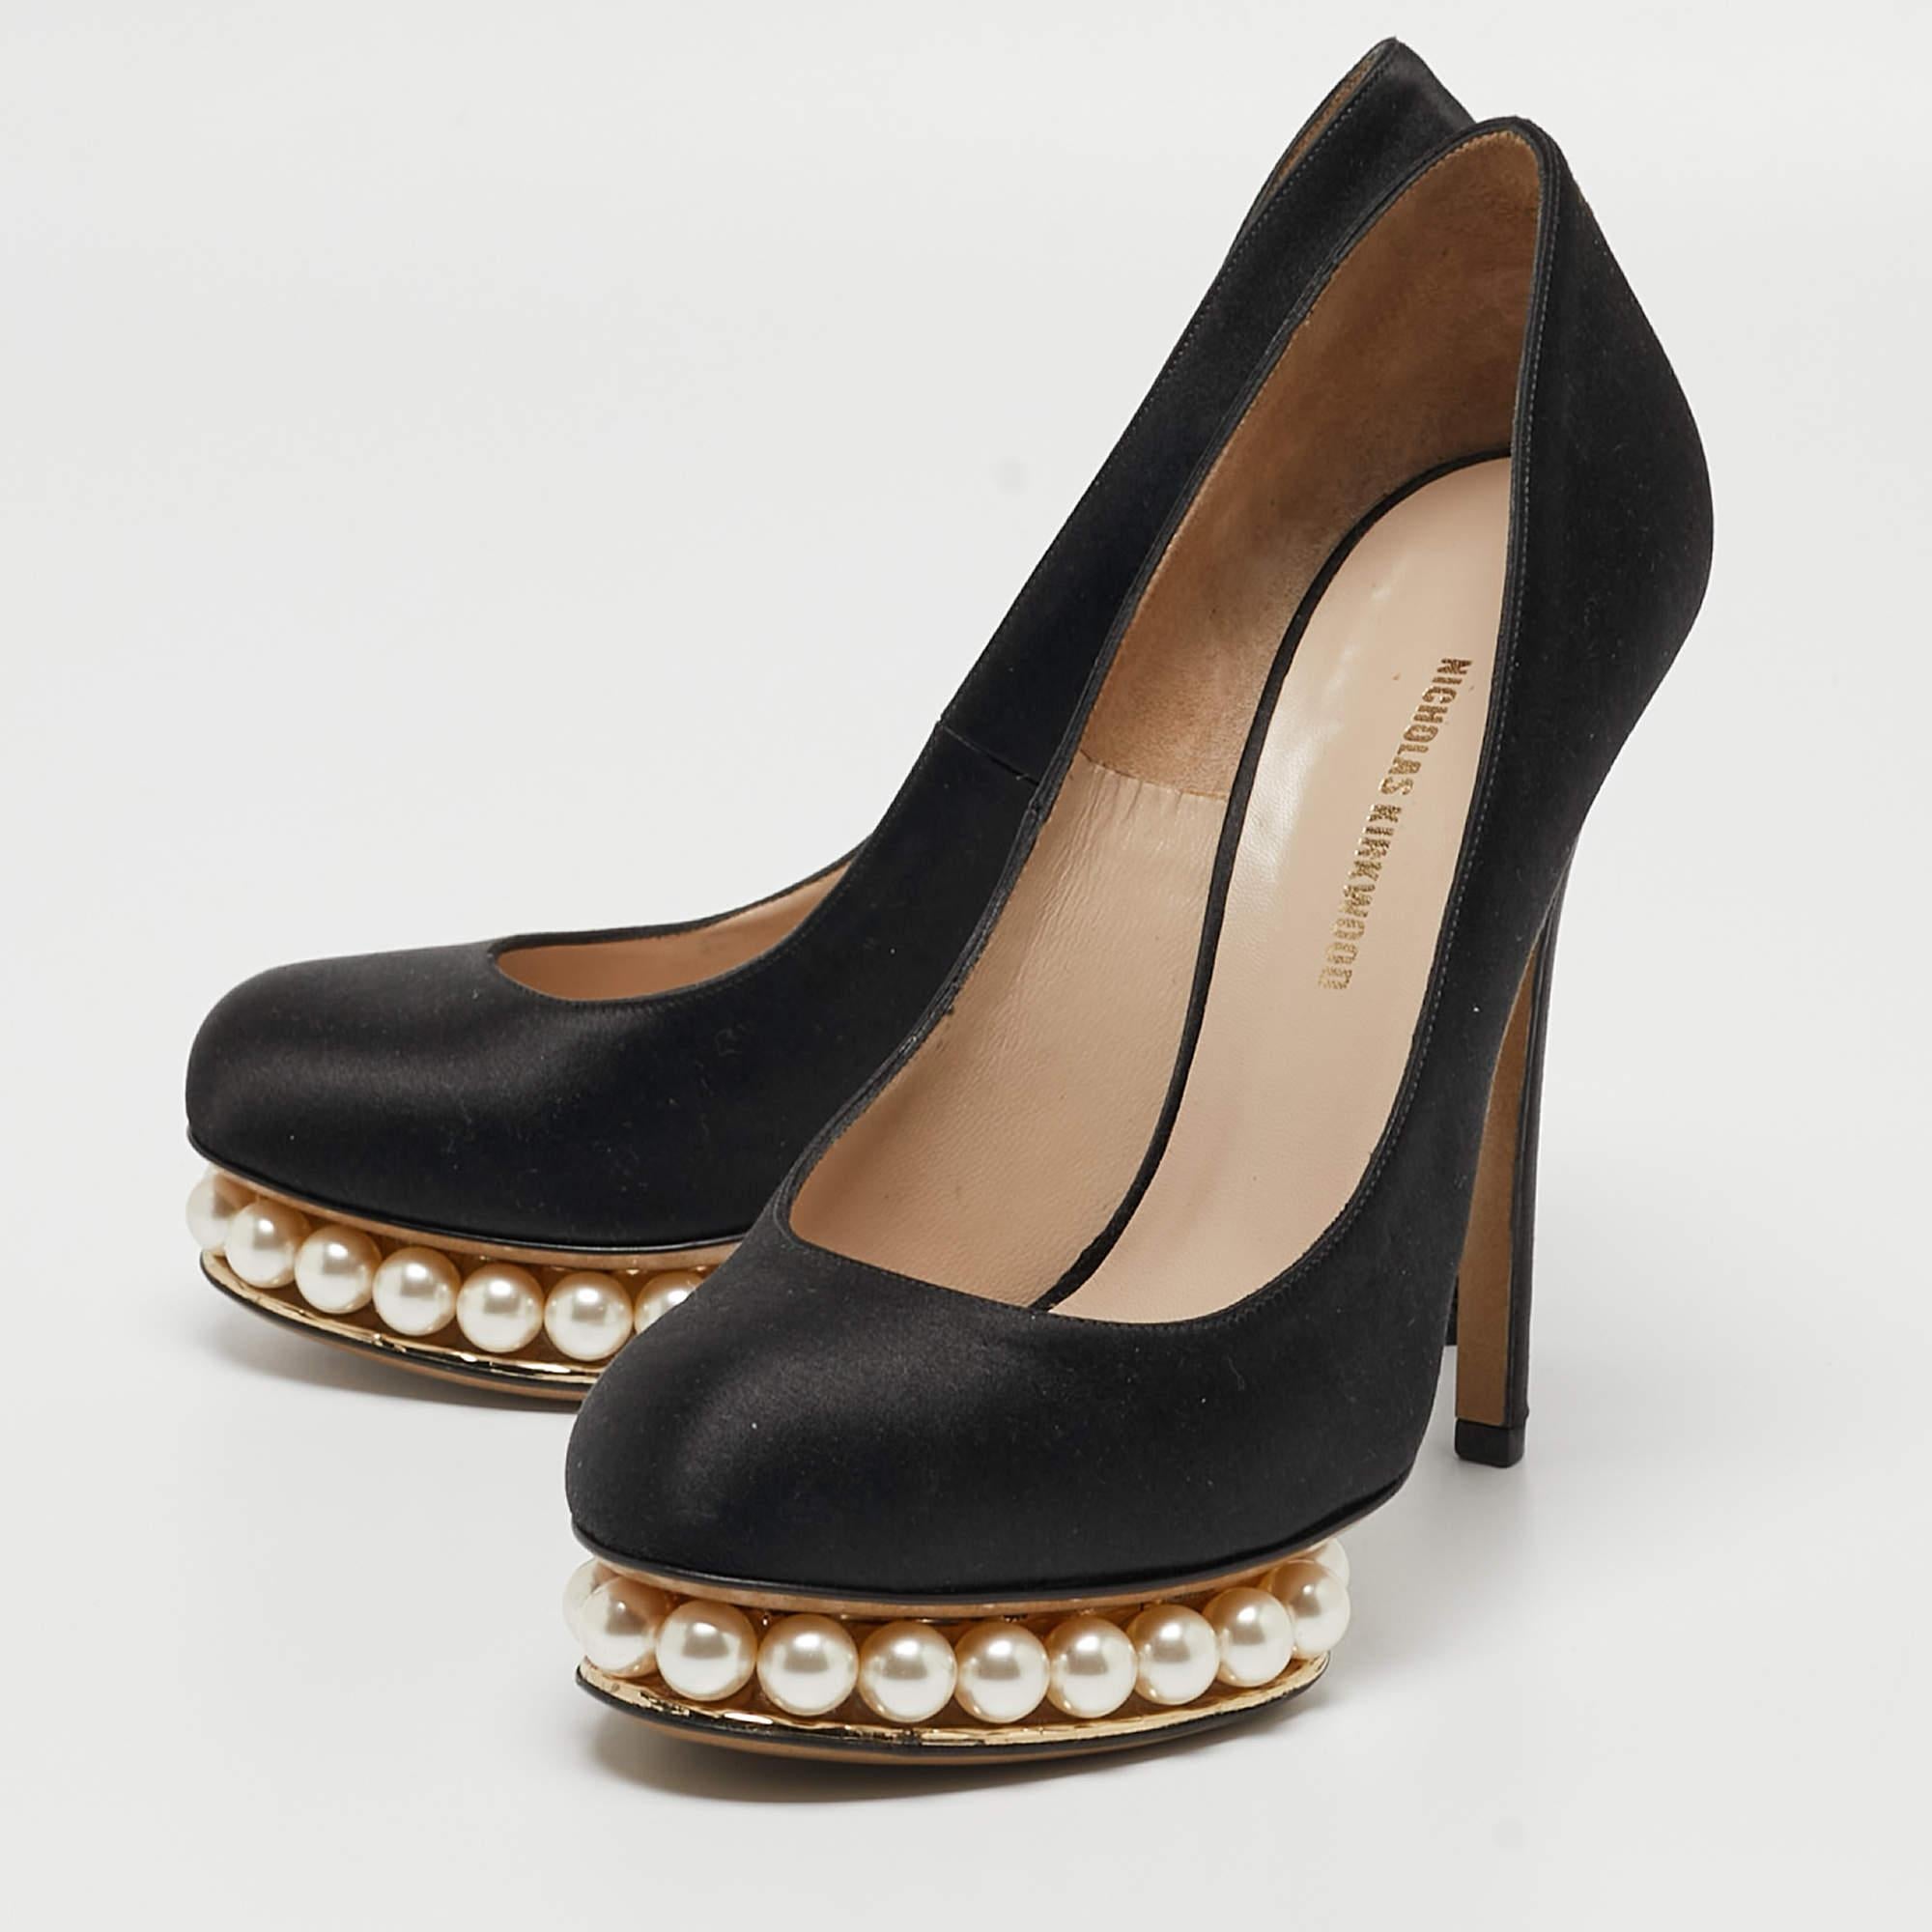 The Nicholas Kirkwood pumps exude elegance with their sleek black satin exterior and intricate pearl embellishments. These luxurious pumps seamlessly blend timeless sophistication with modern charm, making them a captivating choice for any formal